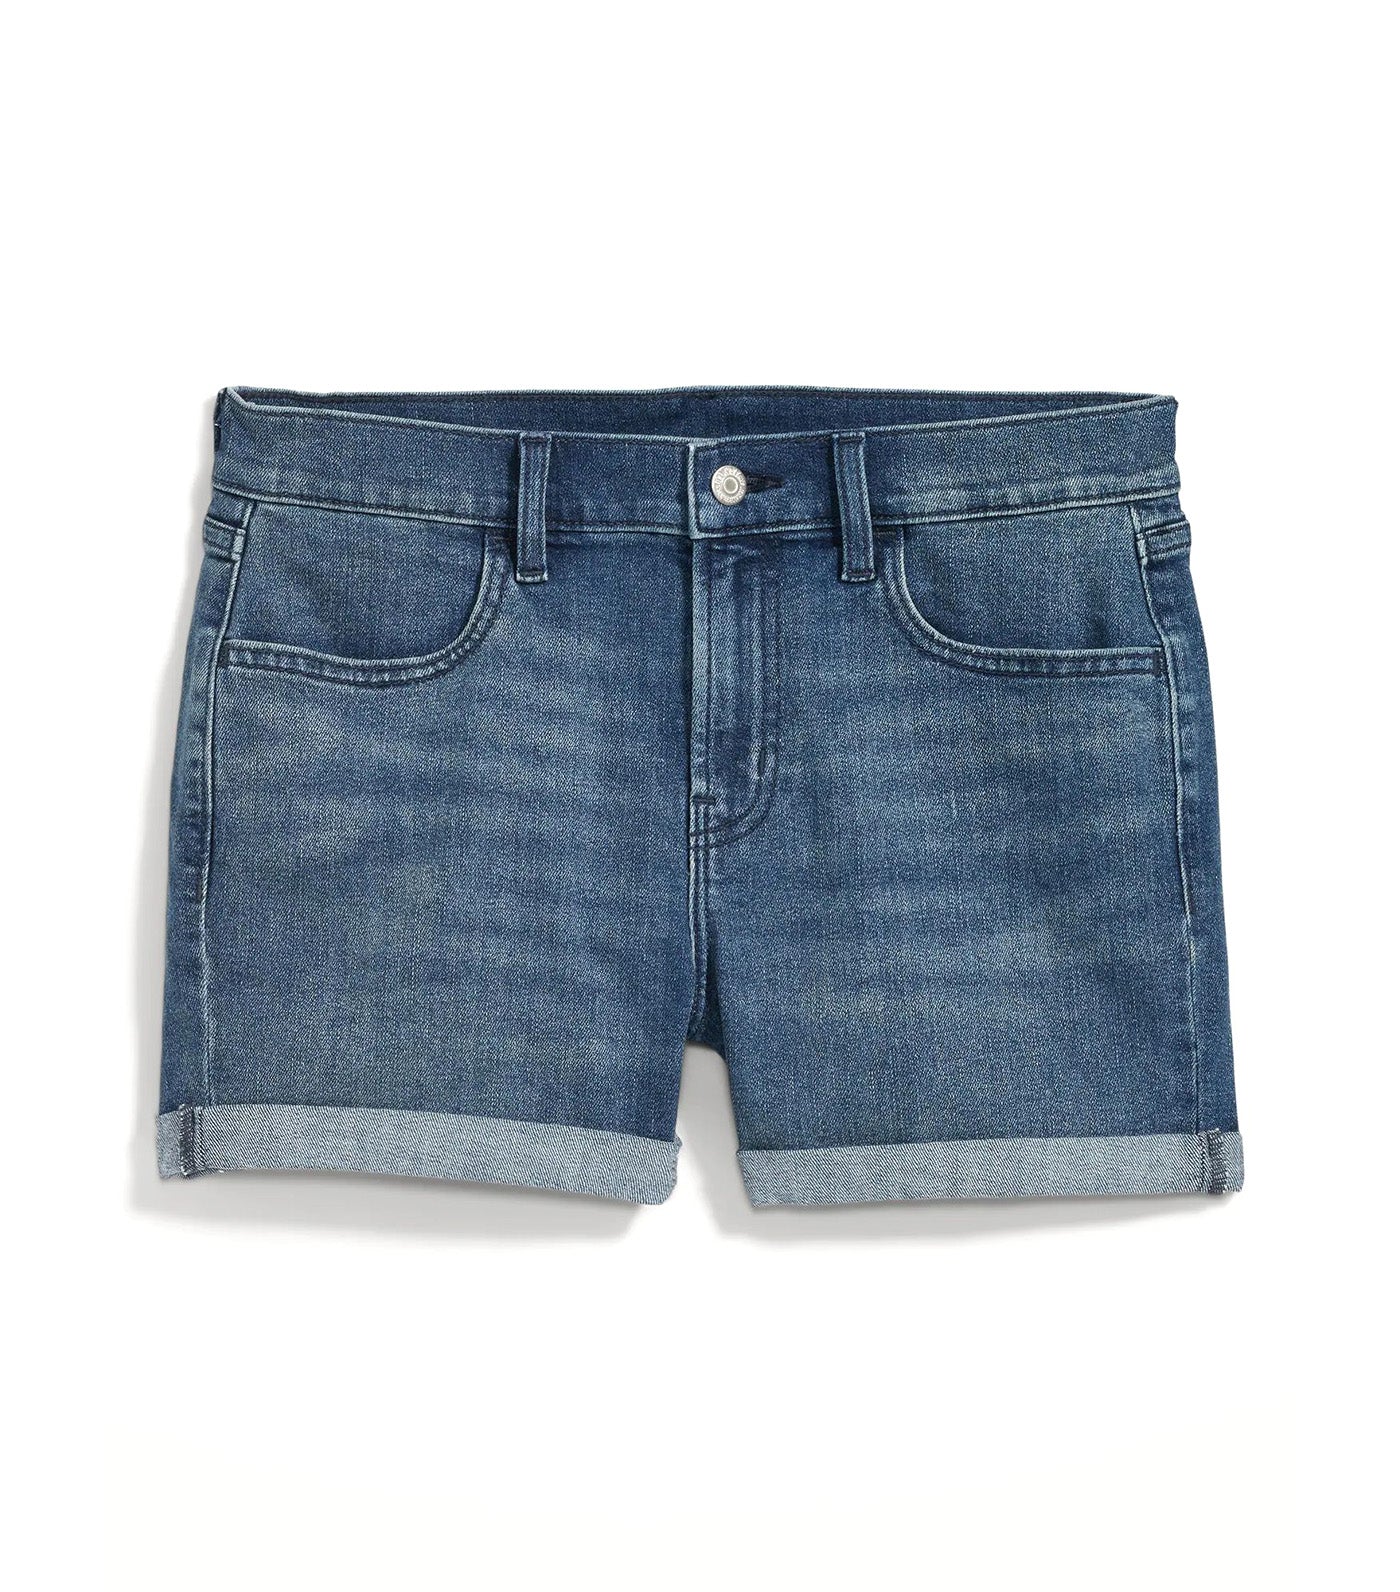 Mid-Rise Wow Jean Shorts for Women 3-inch Inseam Campeche